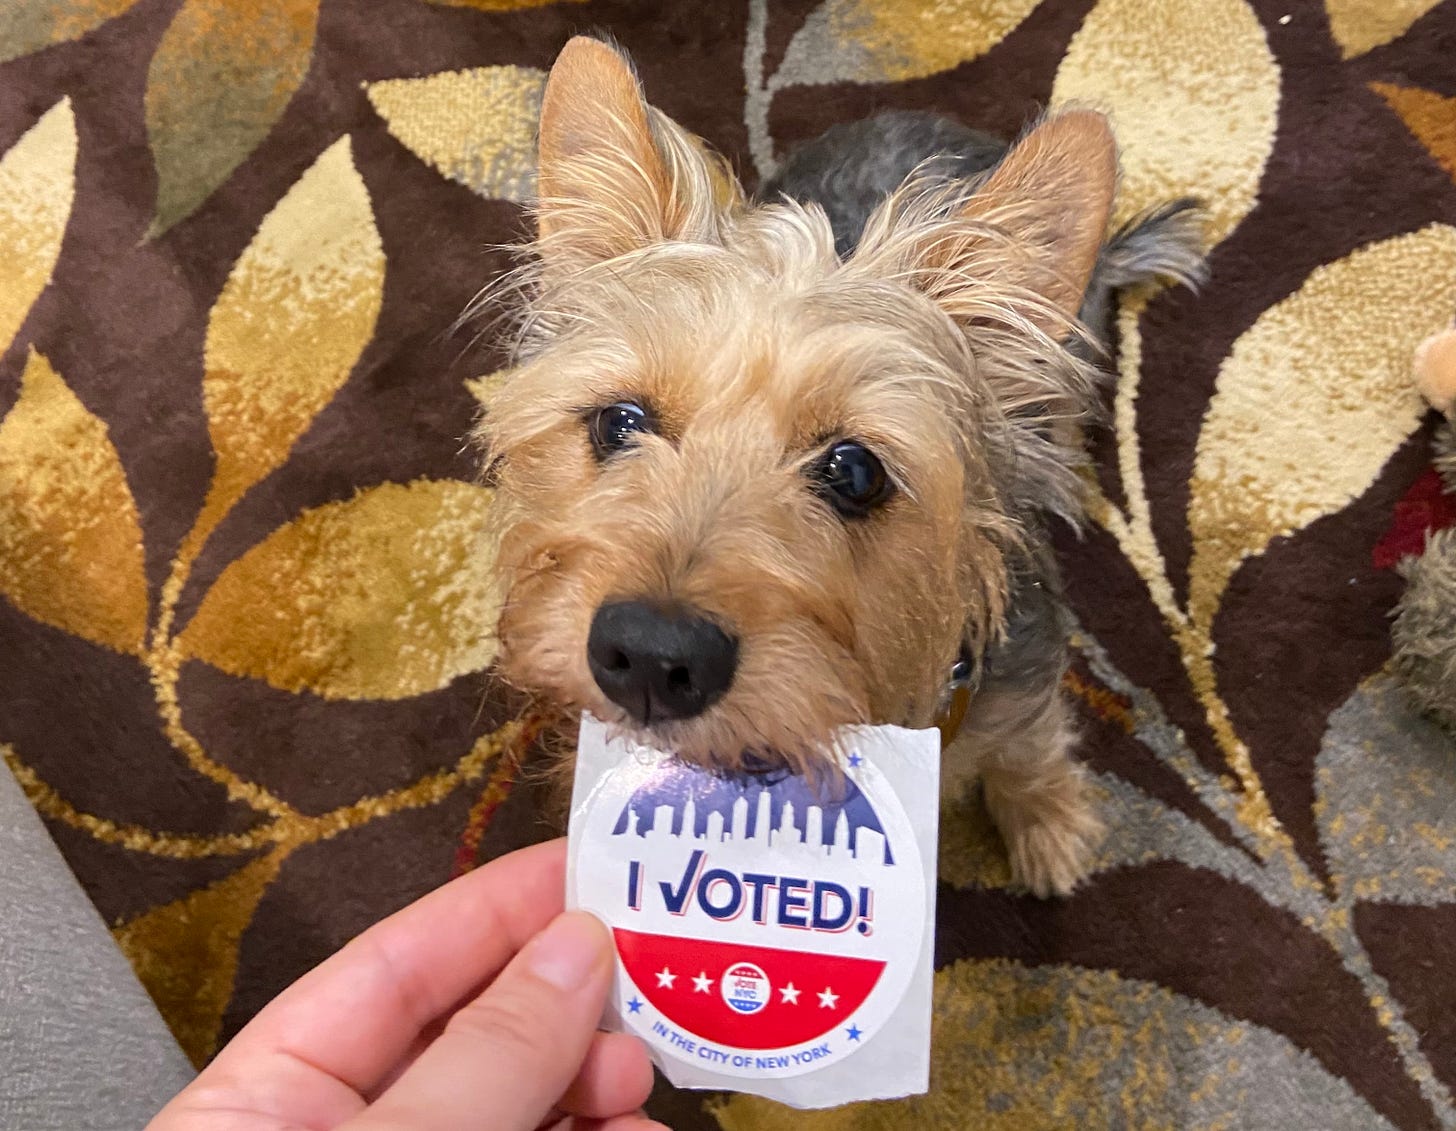 A tan and black terrier biting an "I Voted" sticker